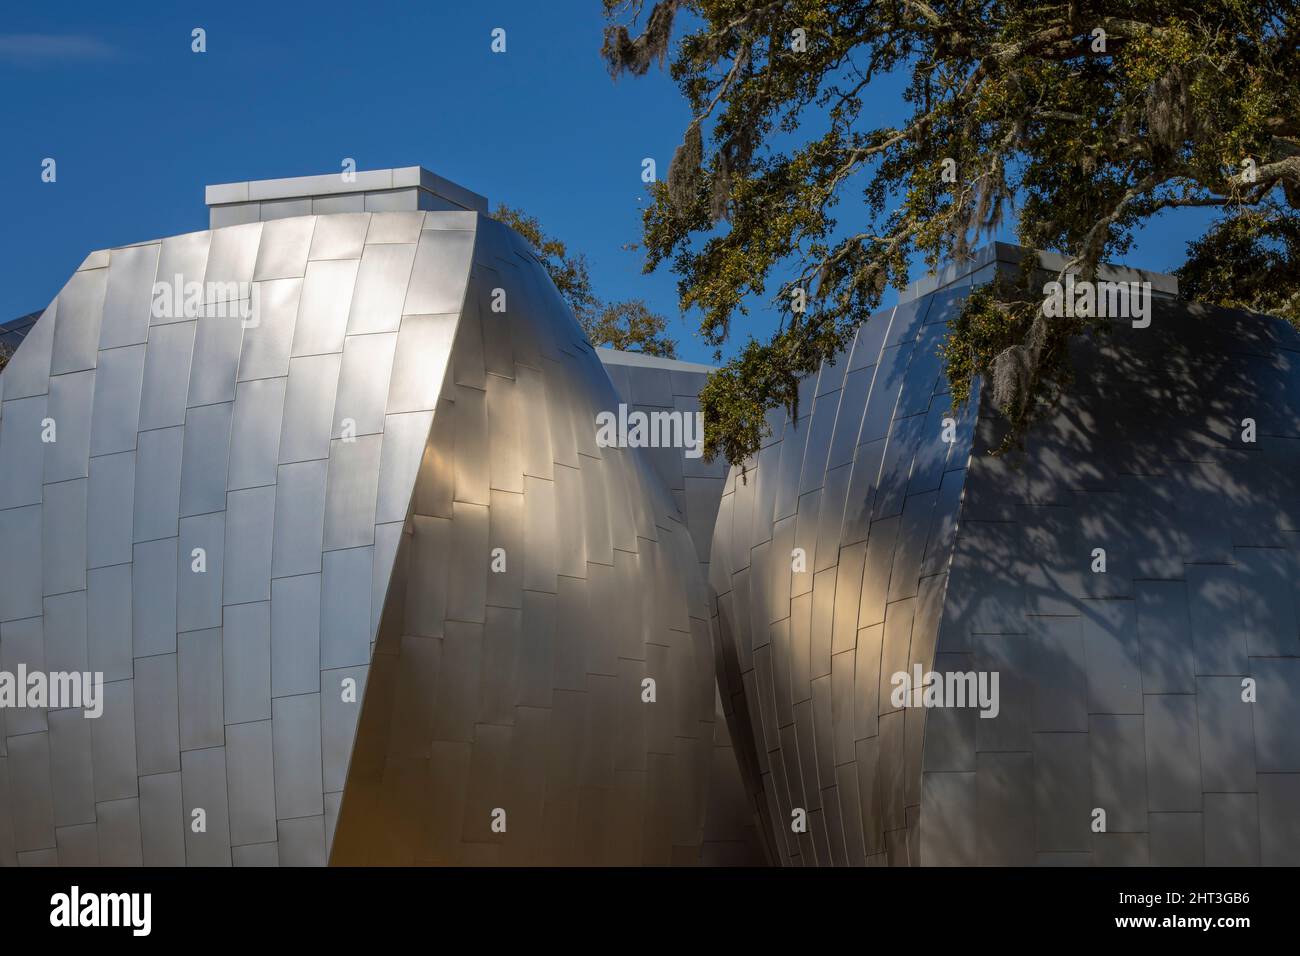 The Ohr-O'Keefe Museum Of Art  in Biloxi, MS designed by architect Frank Gehry. Stock Photo